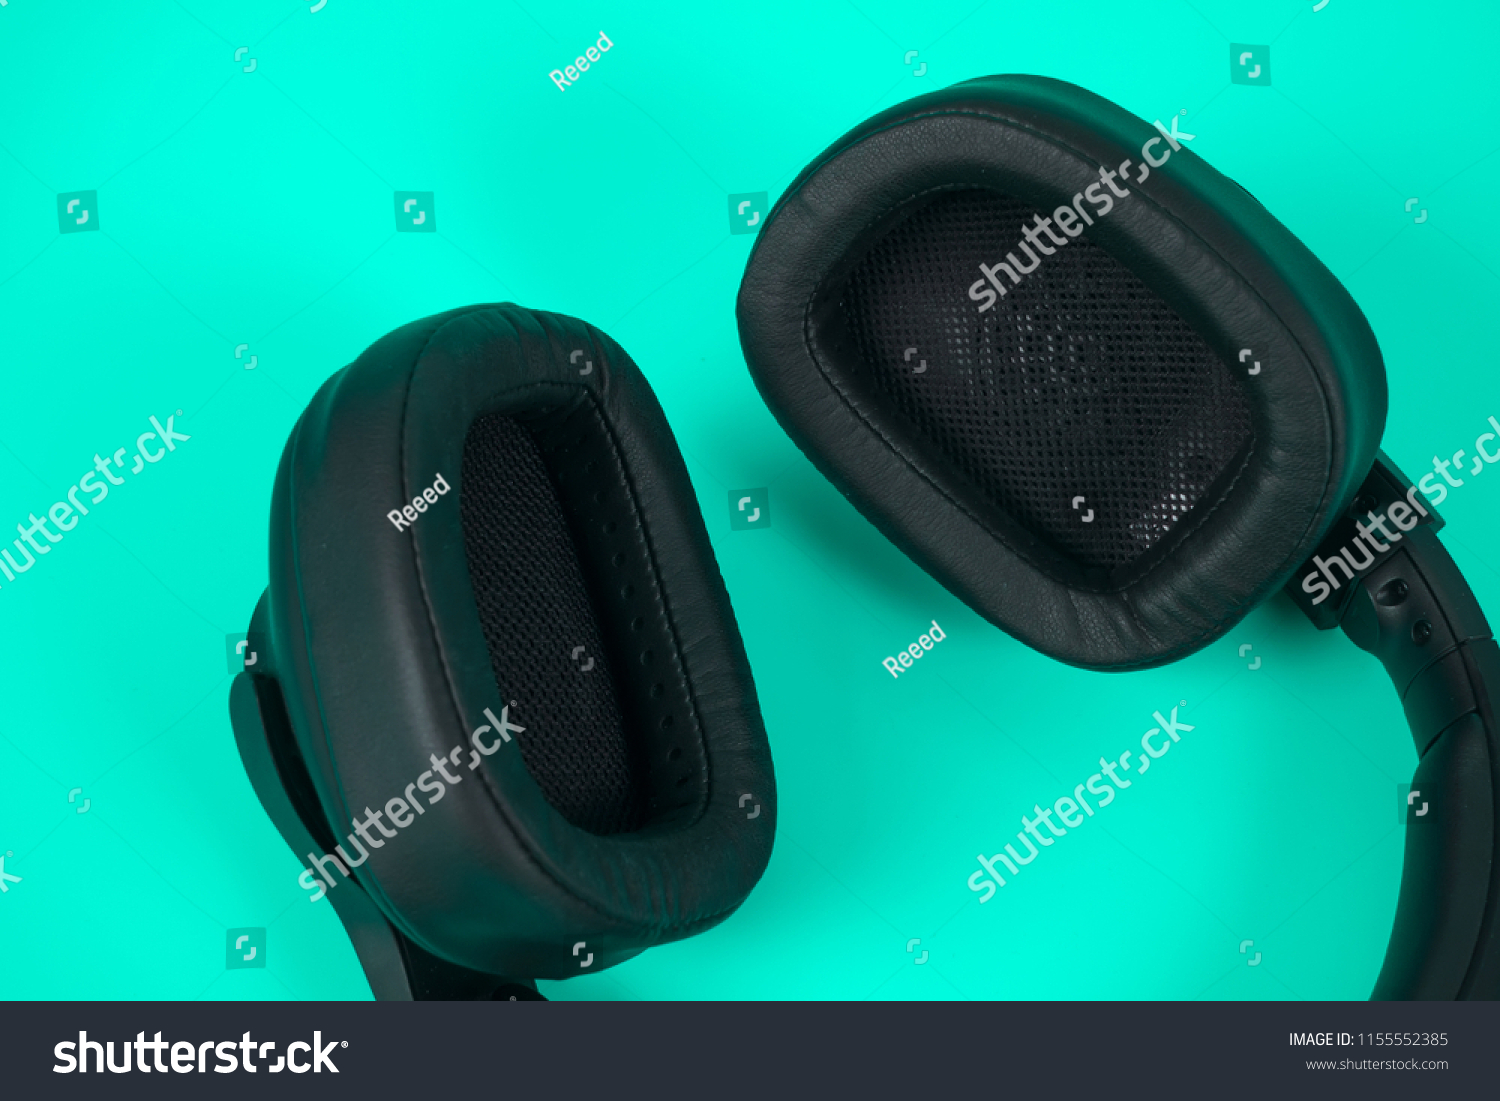 Black Headphons on aqua color background with copyspace. #1155552385